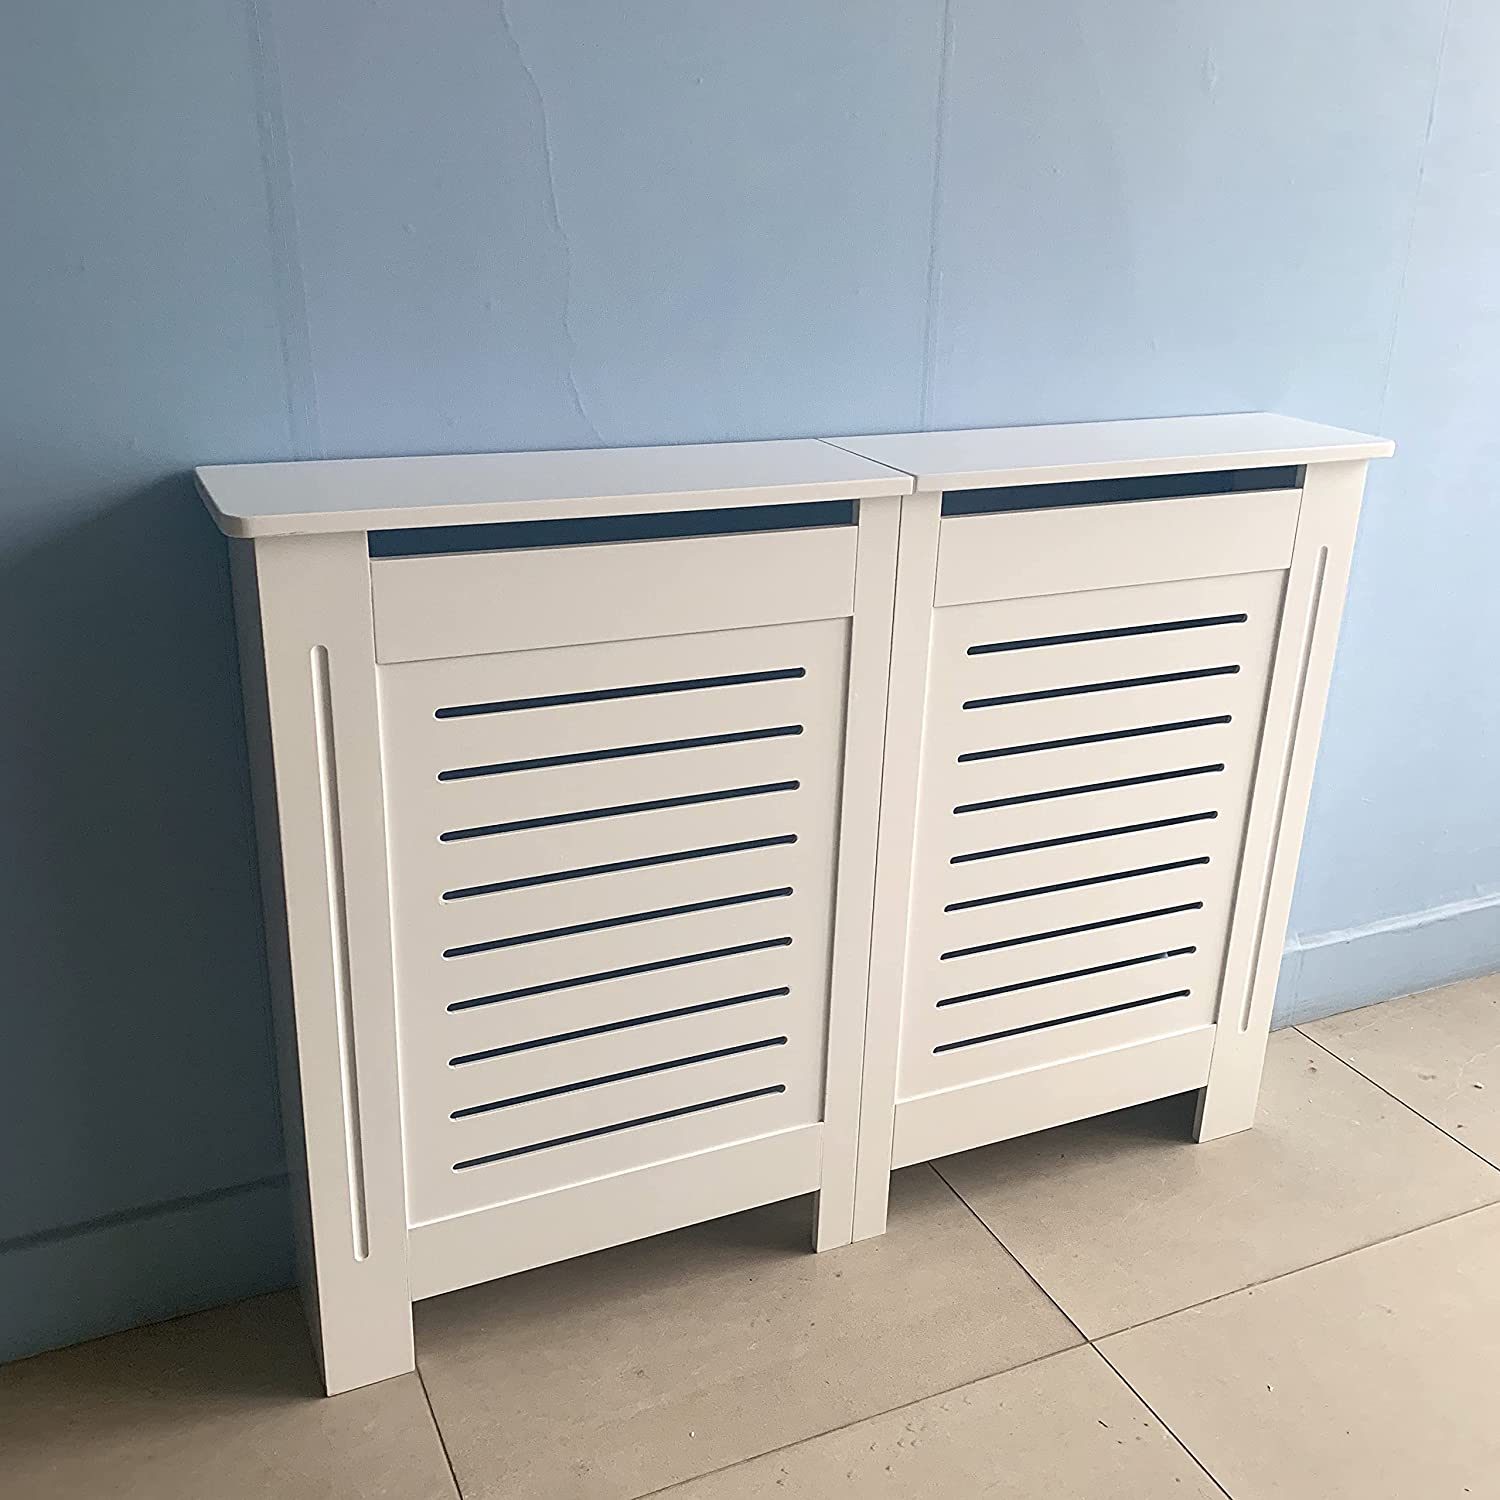 White Wooden Horizontal Slanted Radiator Cover Grill Cabinet Panel Shelf Hallway Furniture In 3 Sizes